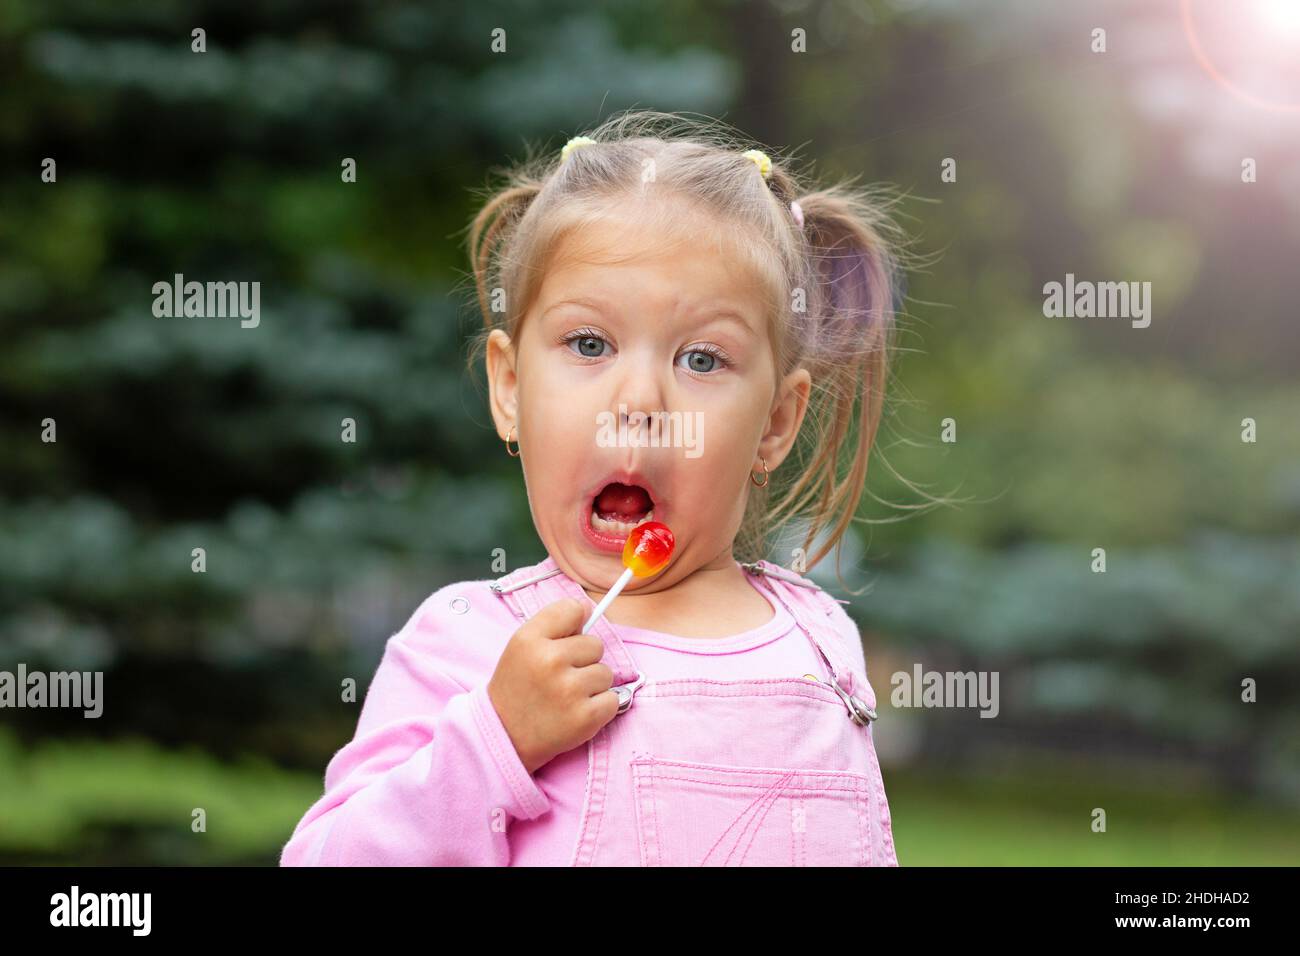 Beautiful child with funny face licking lollipop Stock Photo